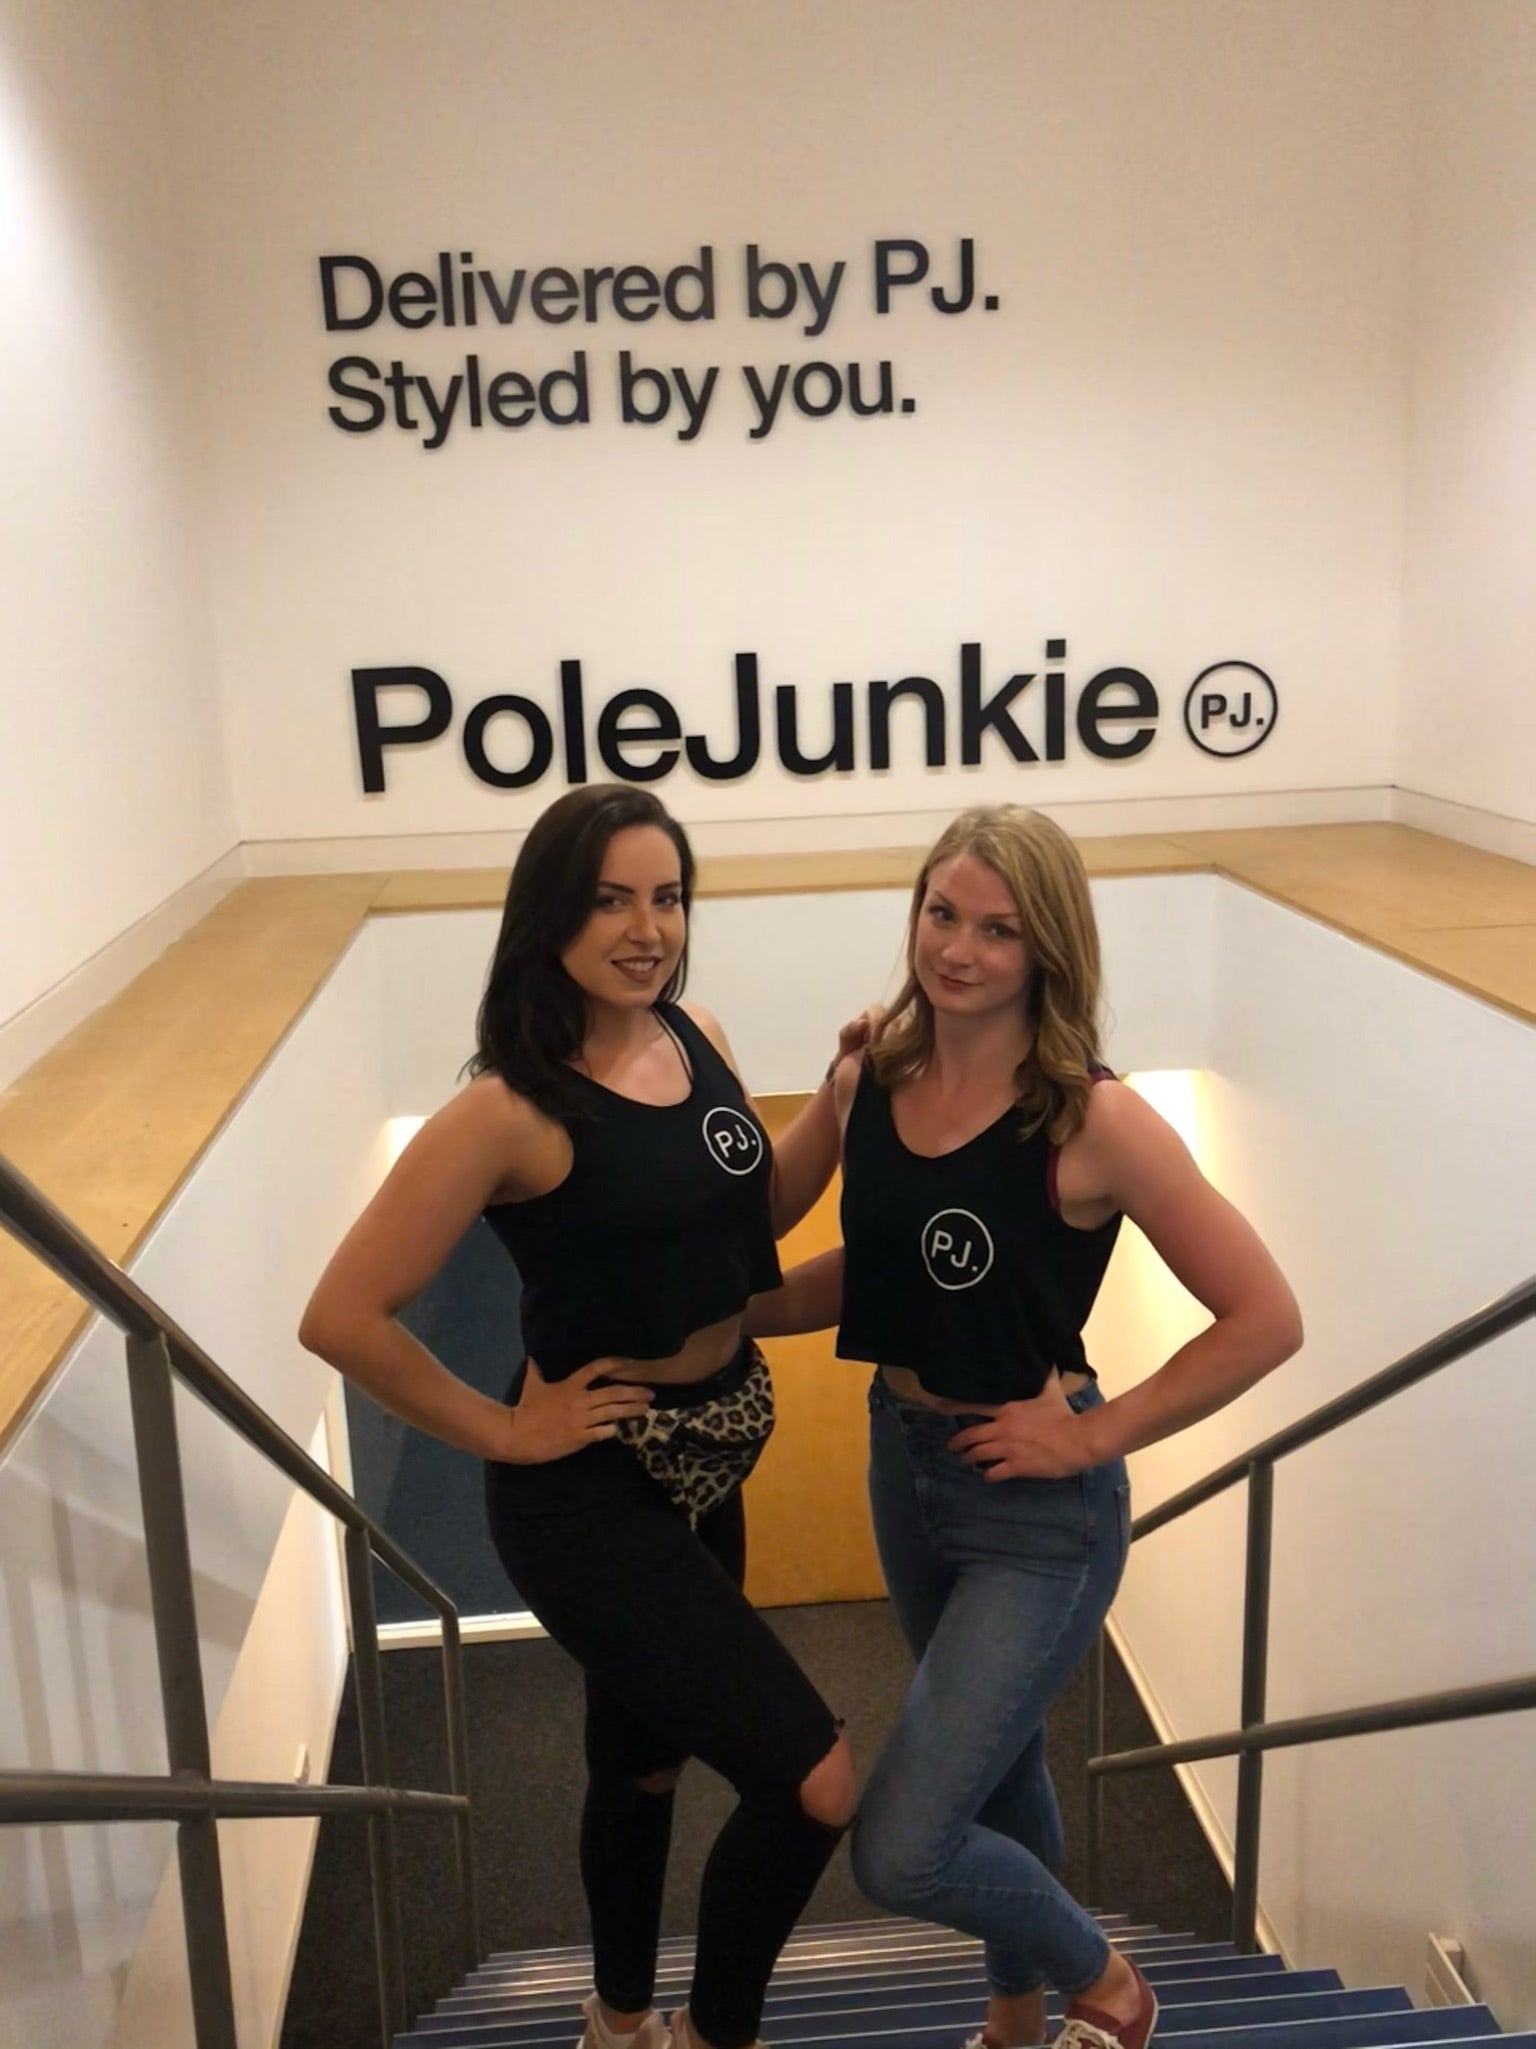 Meet the Women Behind the Magic: Heather & Kirsten, the founders of Pole Junkie